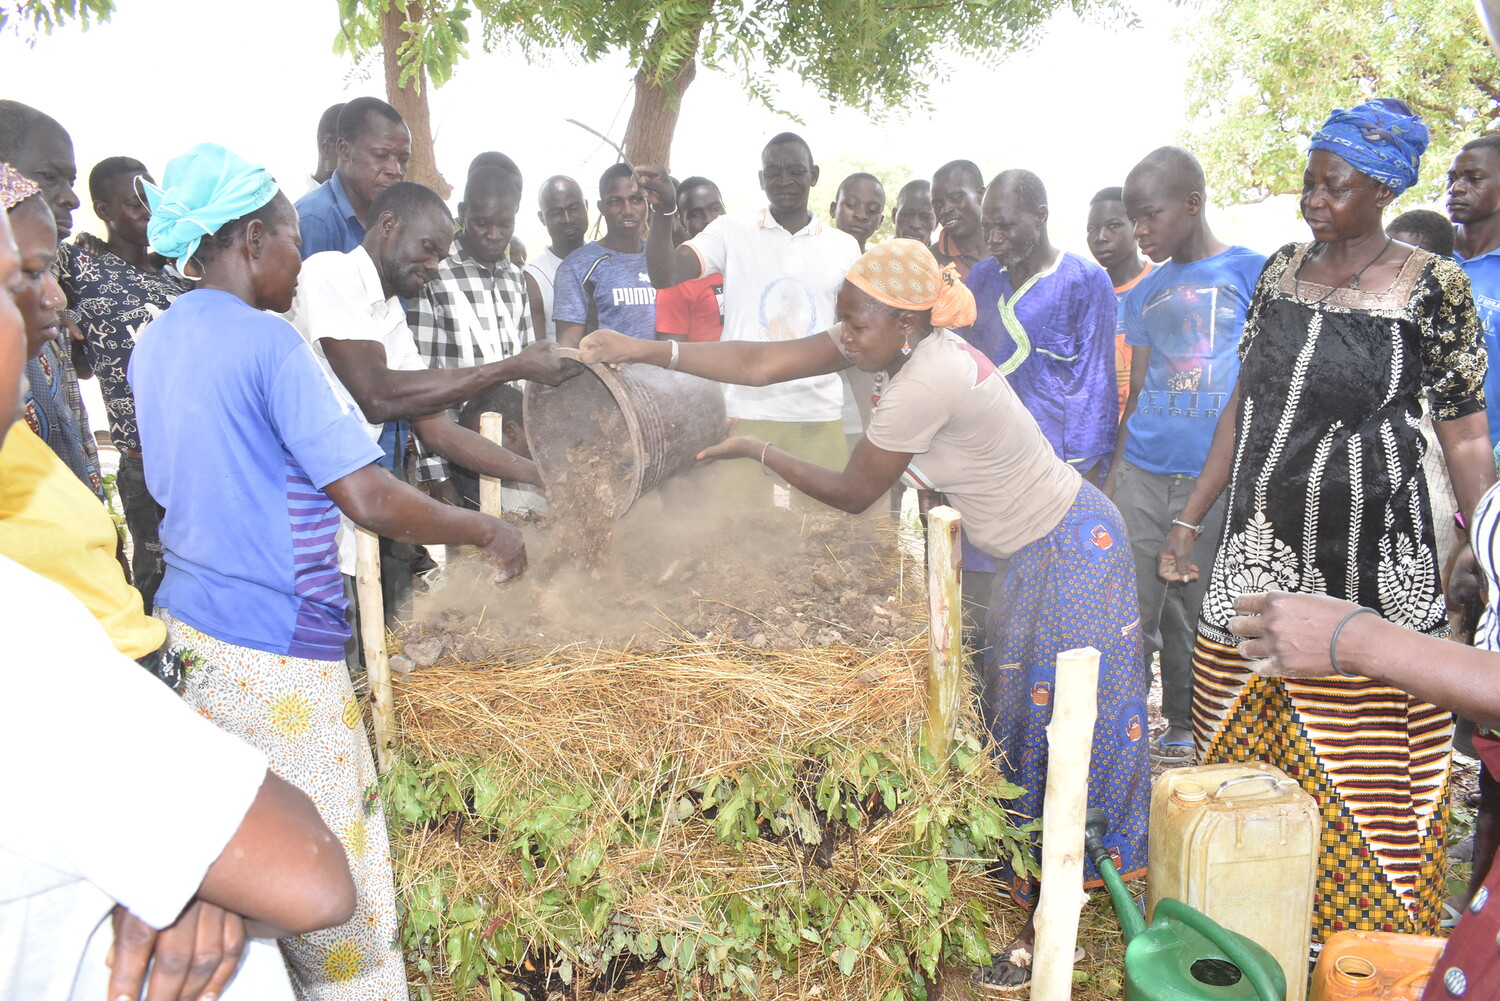 Including both men and women in agricultural trainings such as this compost workshop improves the health, nutrition, and educational opportunities of all the members of the family